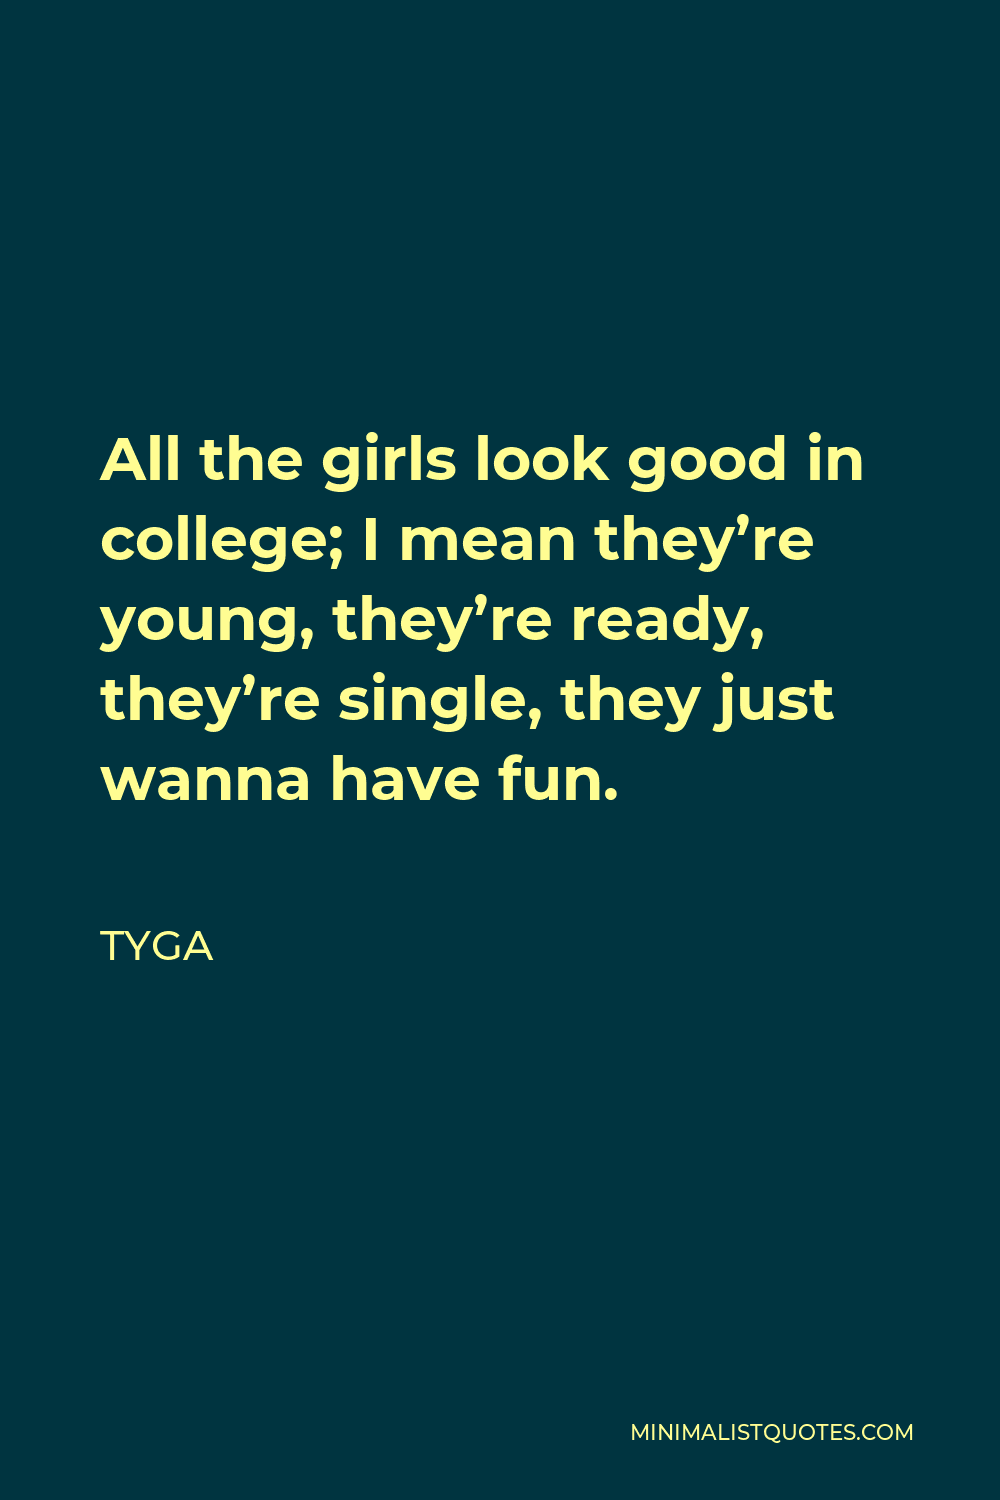 Tyga Quote - All the girls look good in college; I mean they’re young, they’re ready, they’re single, they just wanna have fun.